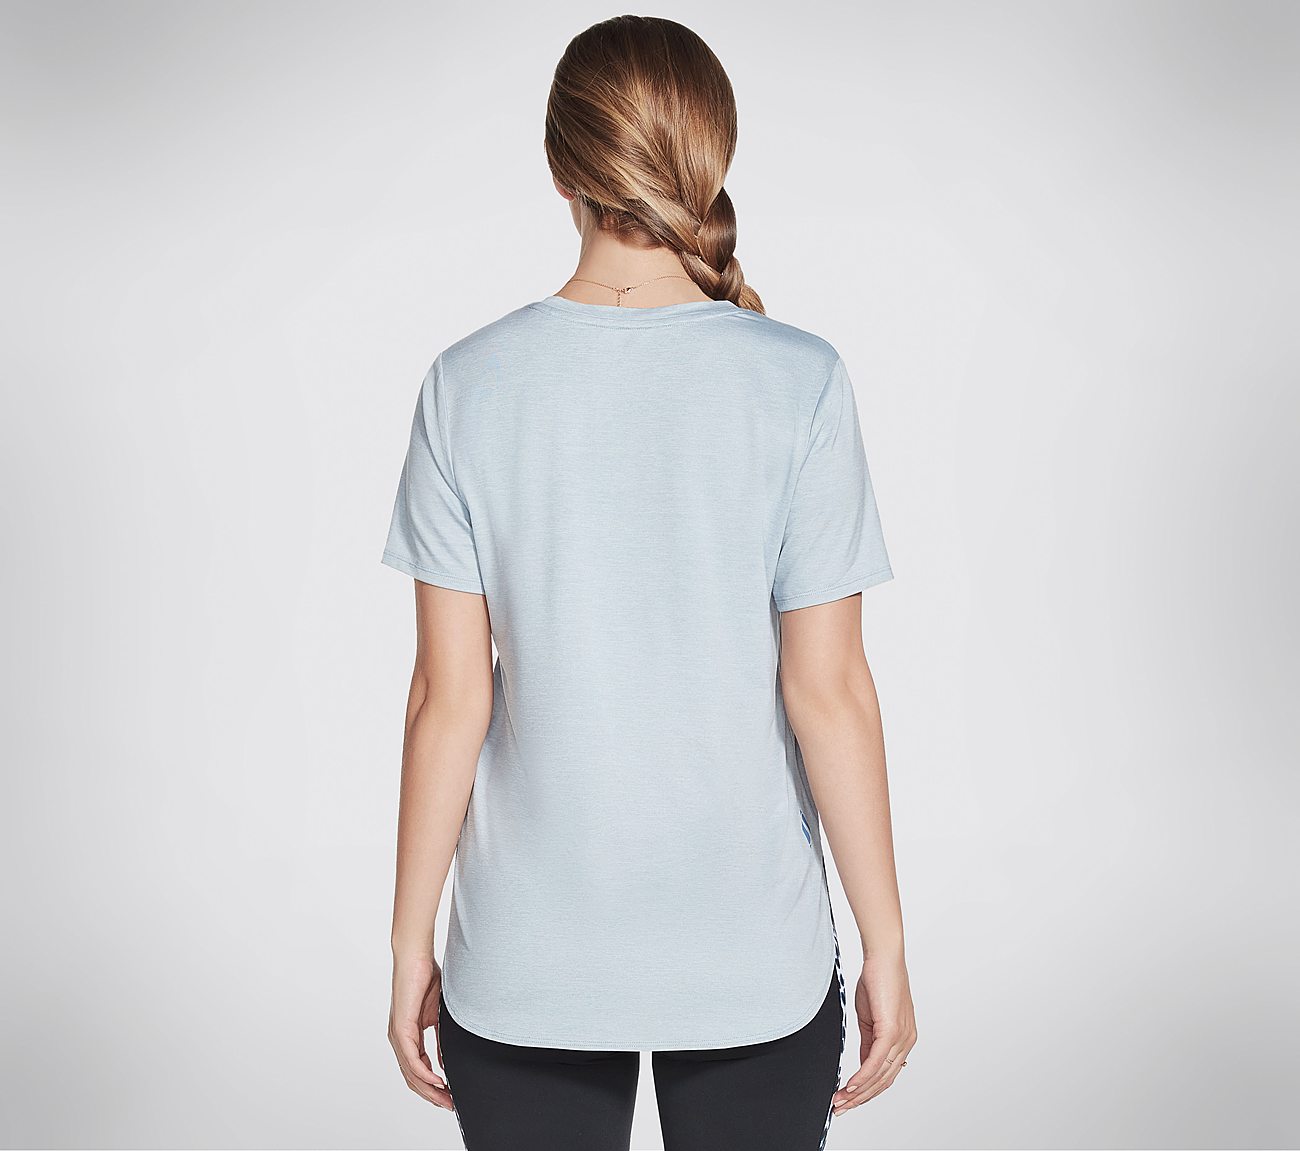 ON THE GO TUNIC, BLUE/PERIWINKLE Apparels Top View